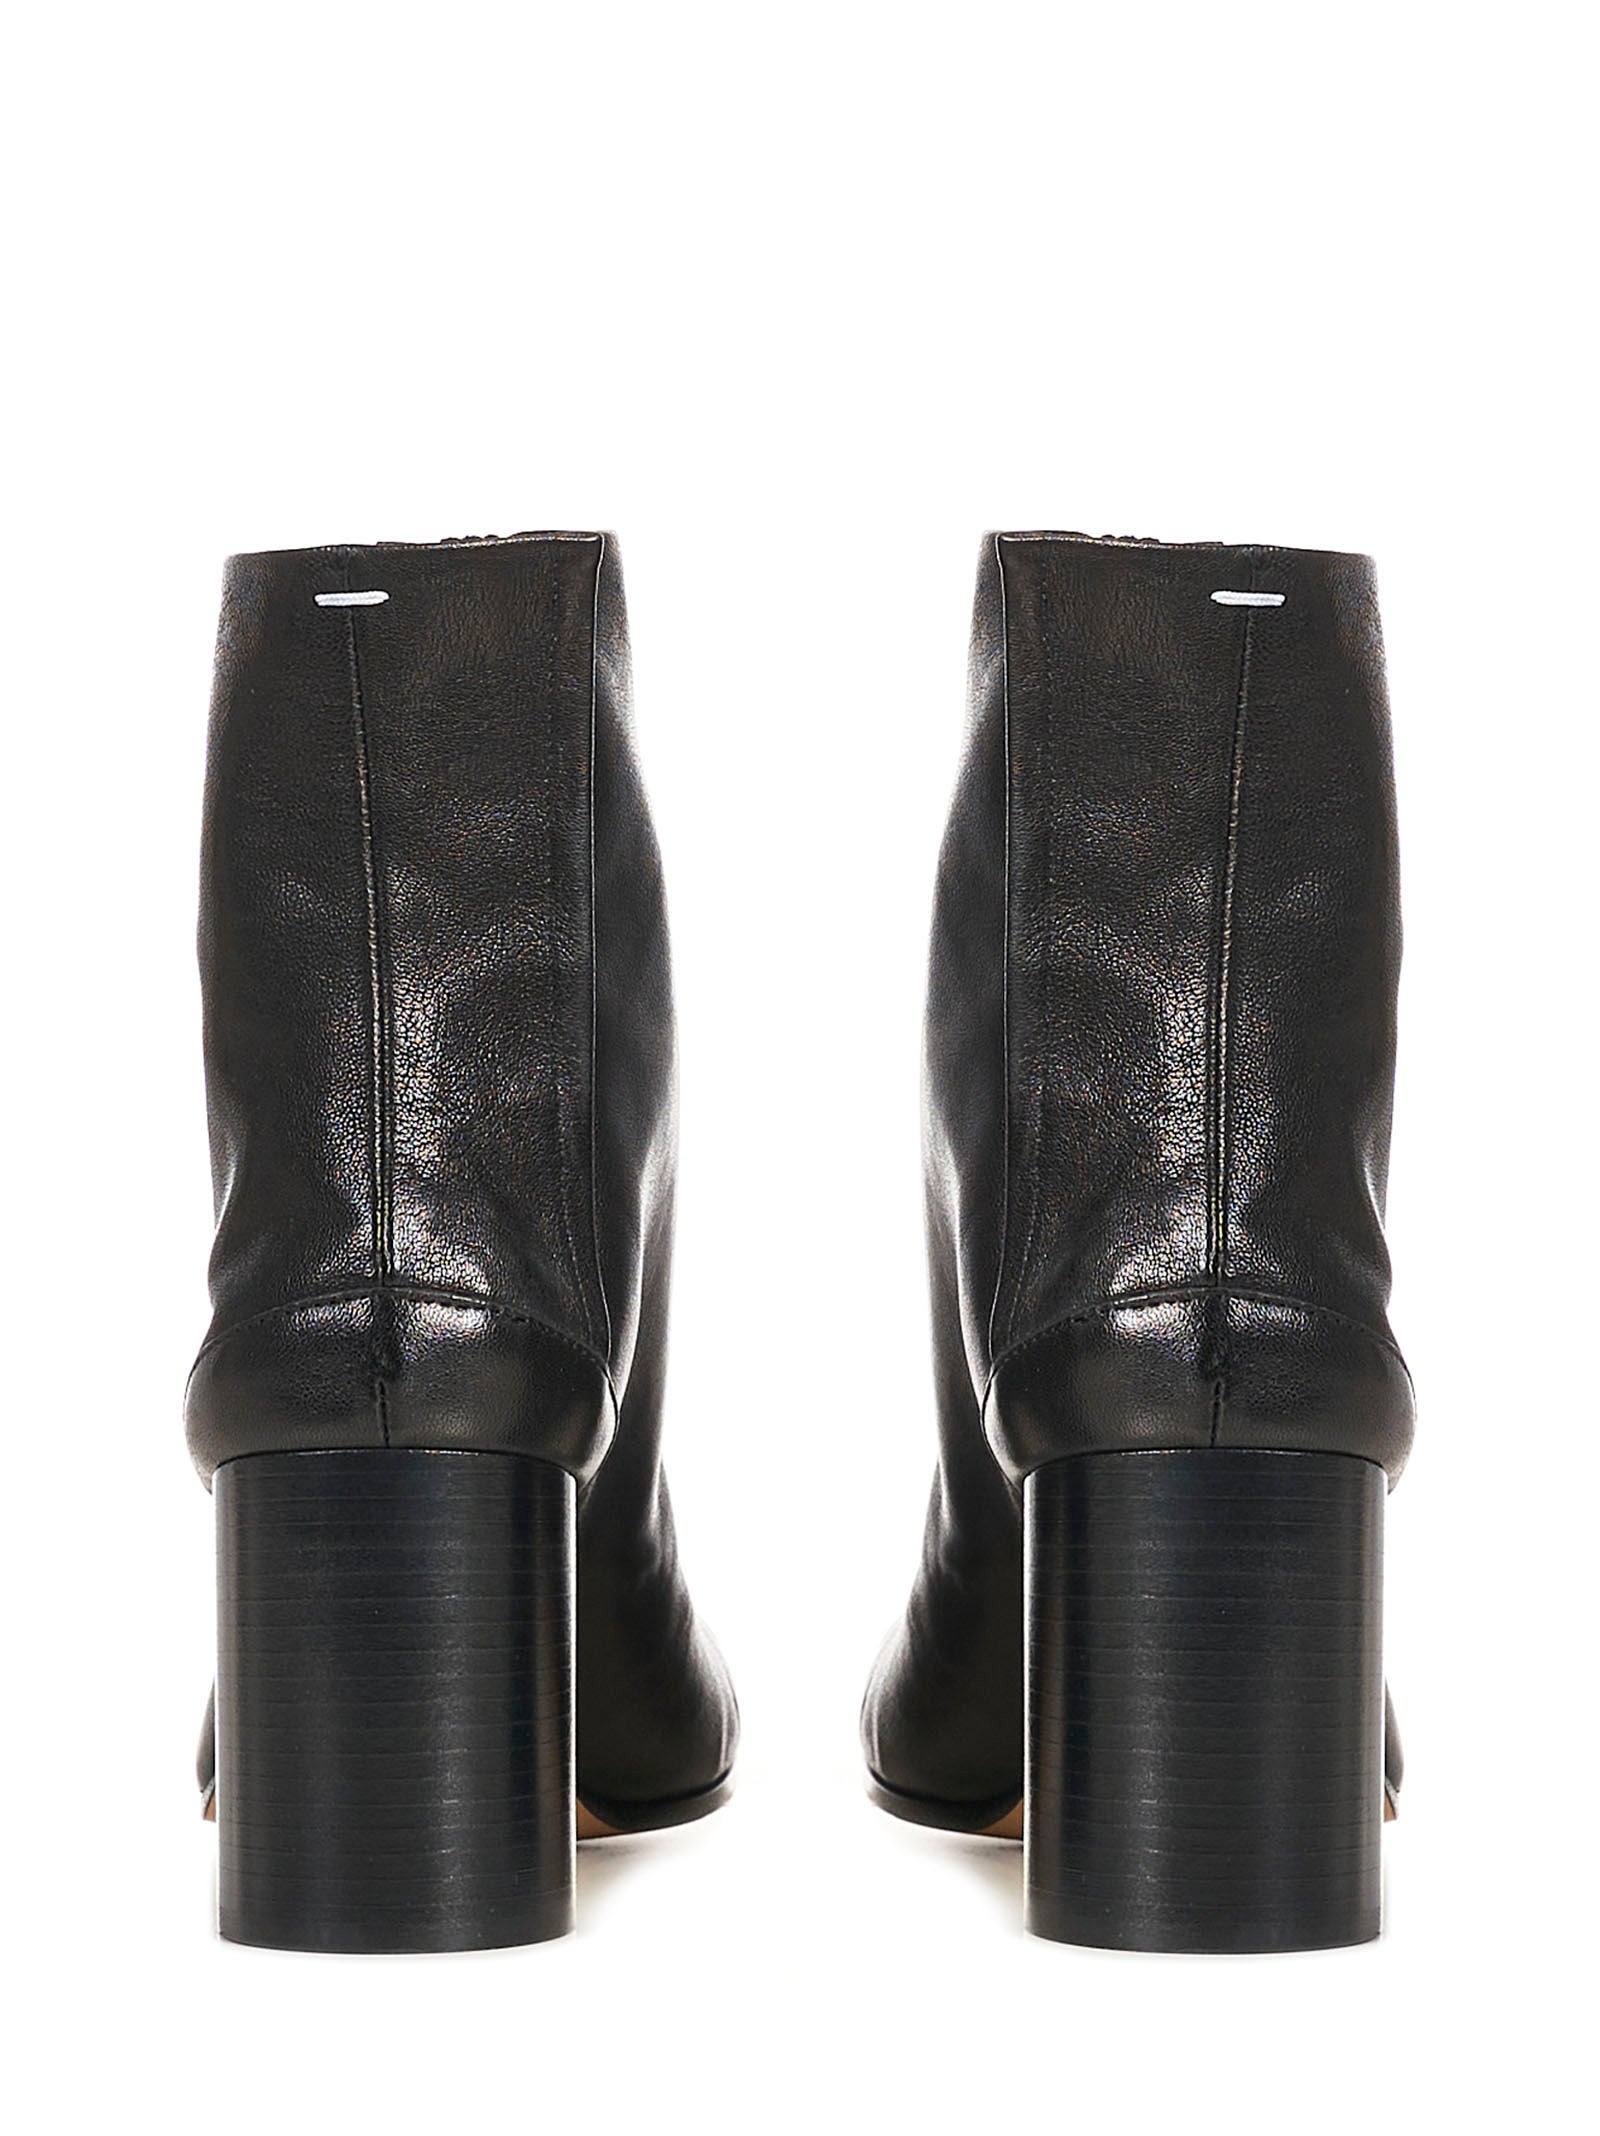 Black vintage leather ankle boots with Tabi split-toe and cylindrical heel. - 3